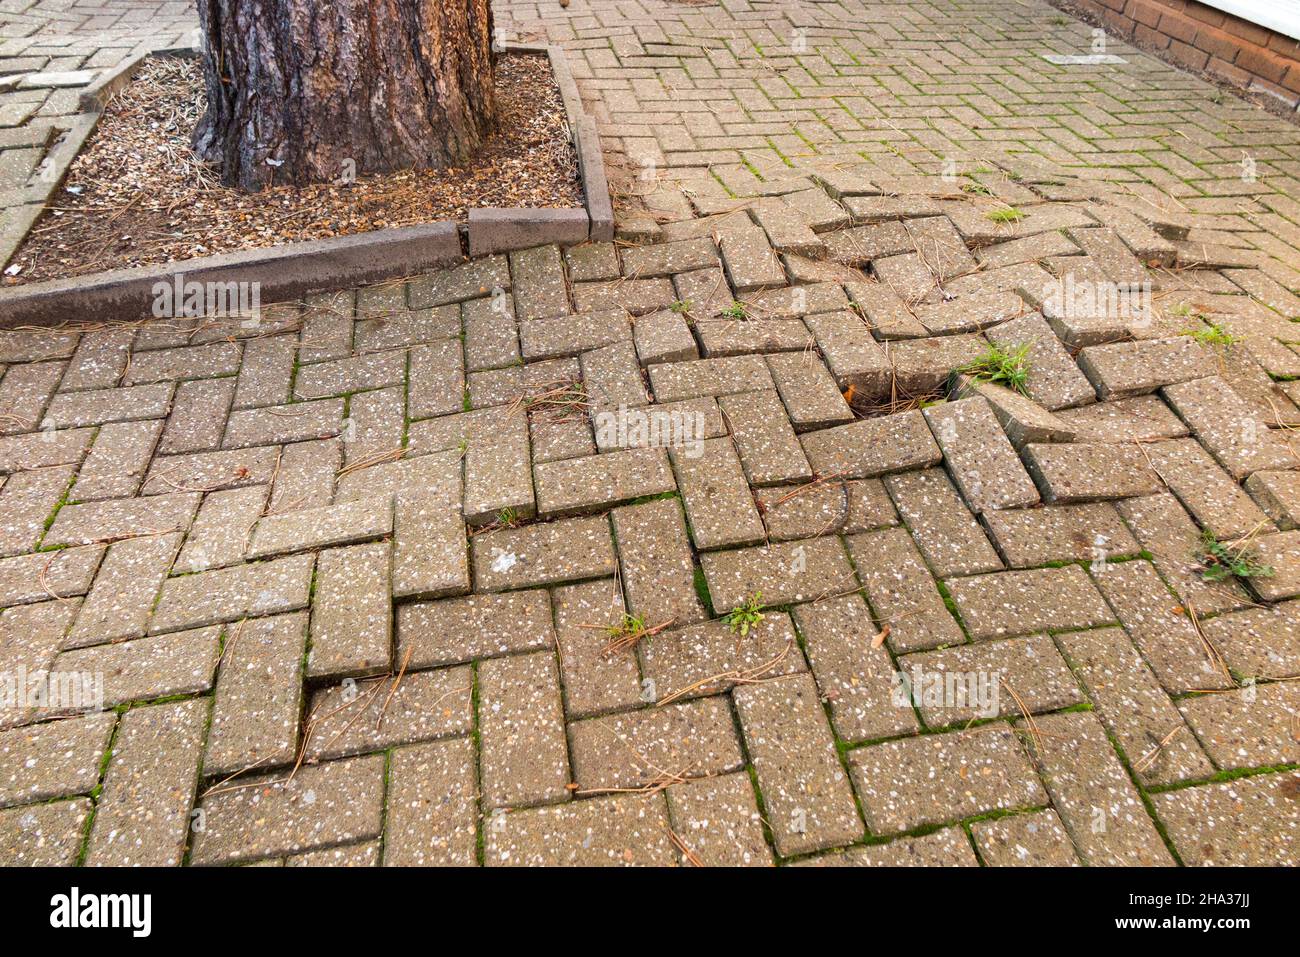 Growing large roots from a tree cause brick paviers, which are walking surface to pedestrians on the pavement to cars to park on, to move and lift out of the ground creating uneven and hazardous trip hazard. London. UK. (127) Stock Photo